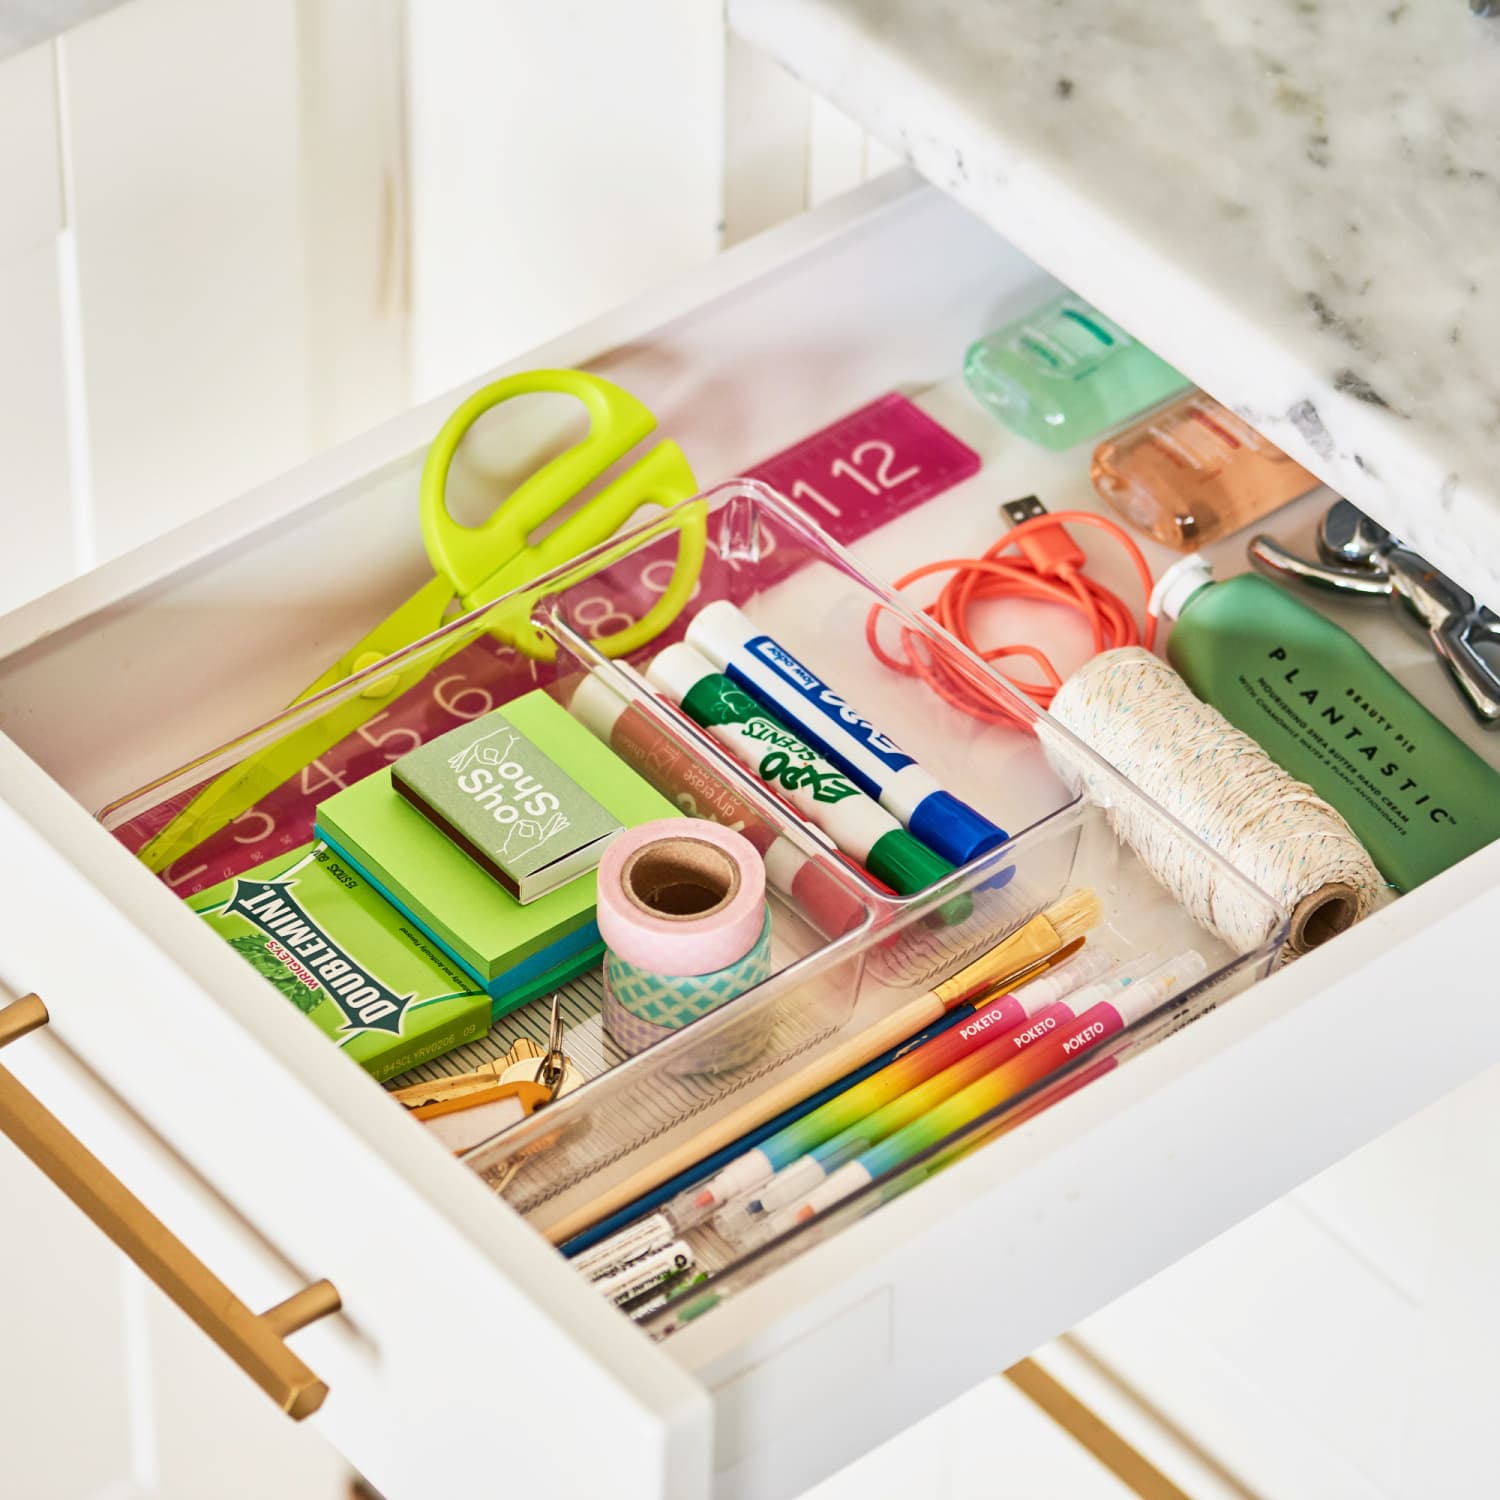 10 Amazingly Simple Hacks to Organize Your Junk Drawer